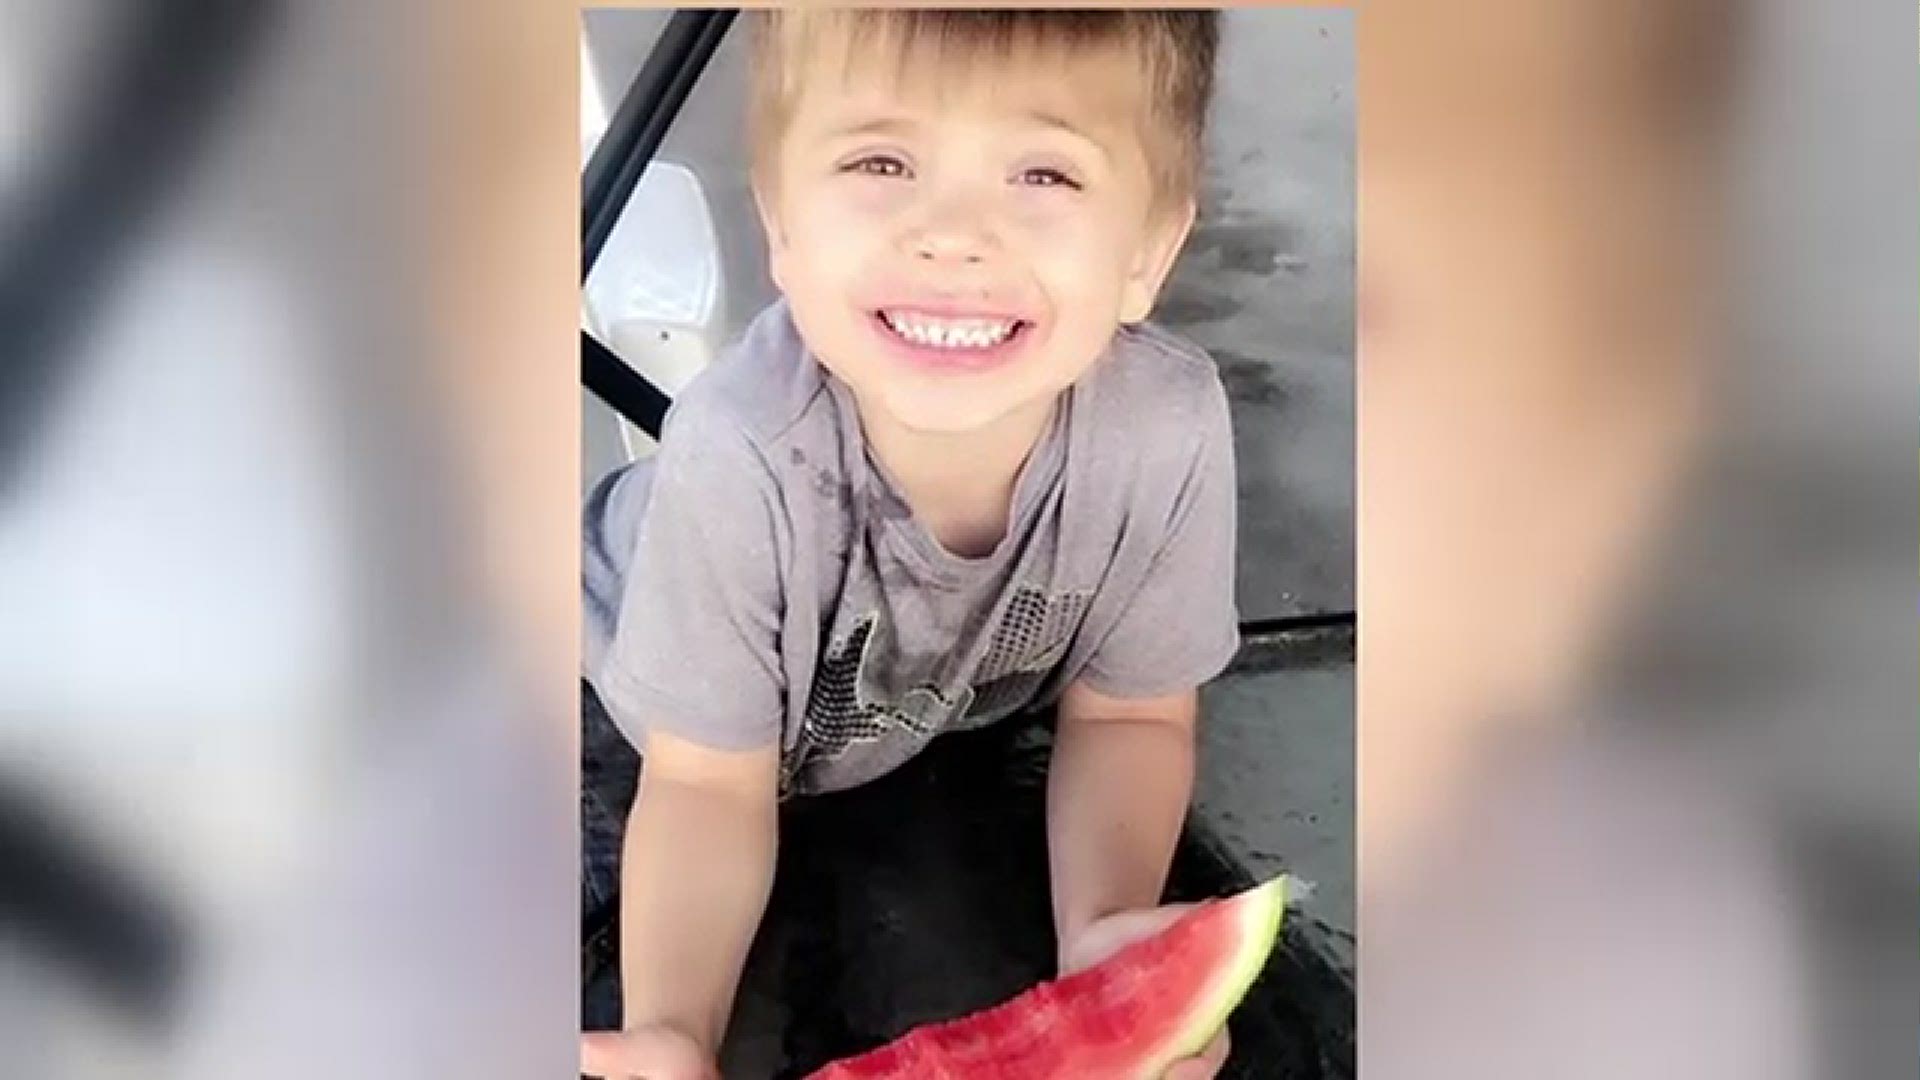 The town of Wilson, North Carolina said goodbye to 5-year-old Cannon Hinnant on Thursday. The family said Cannon was riding his bike when their neighbor shot him.